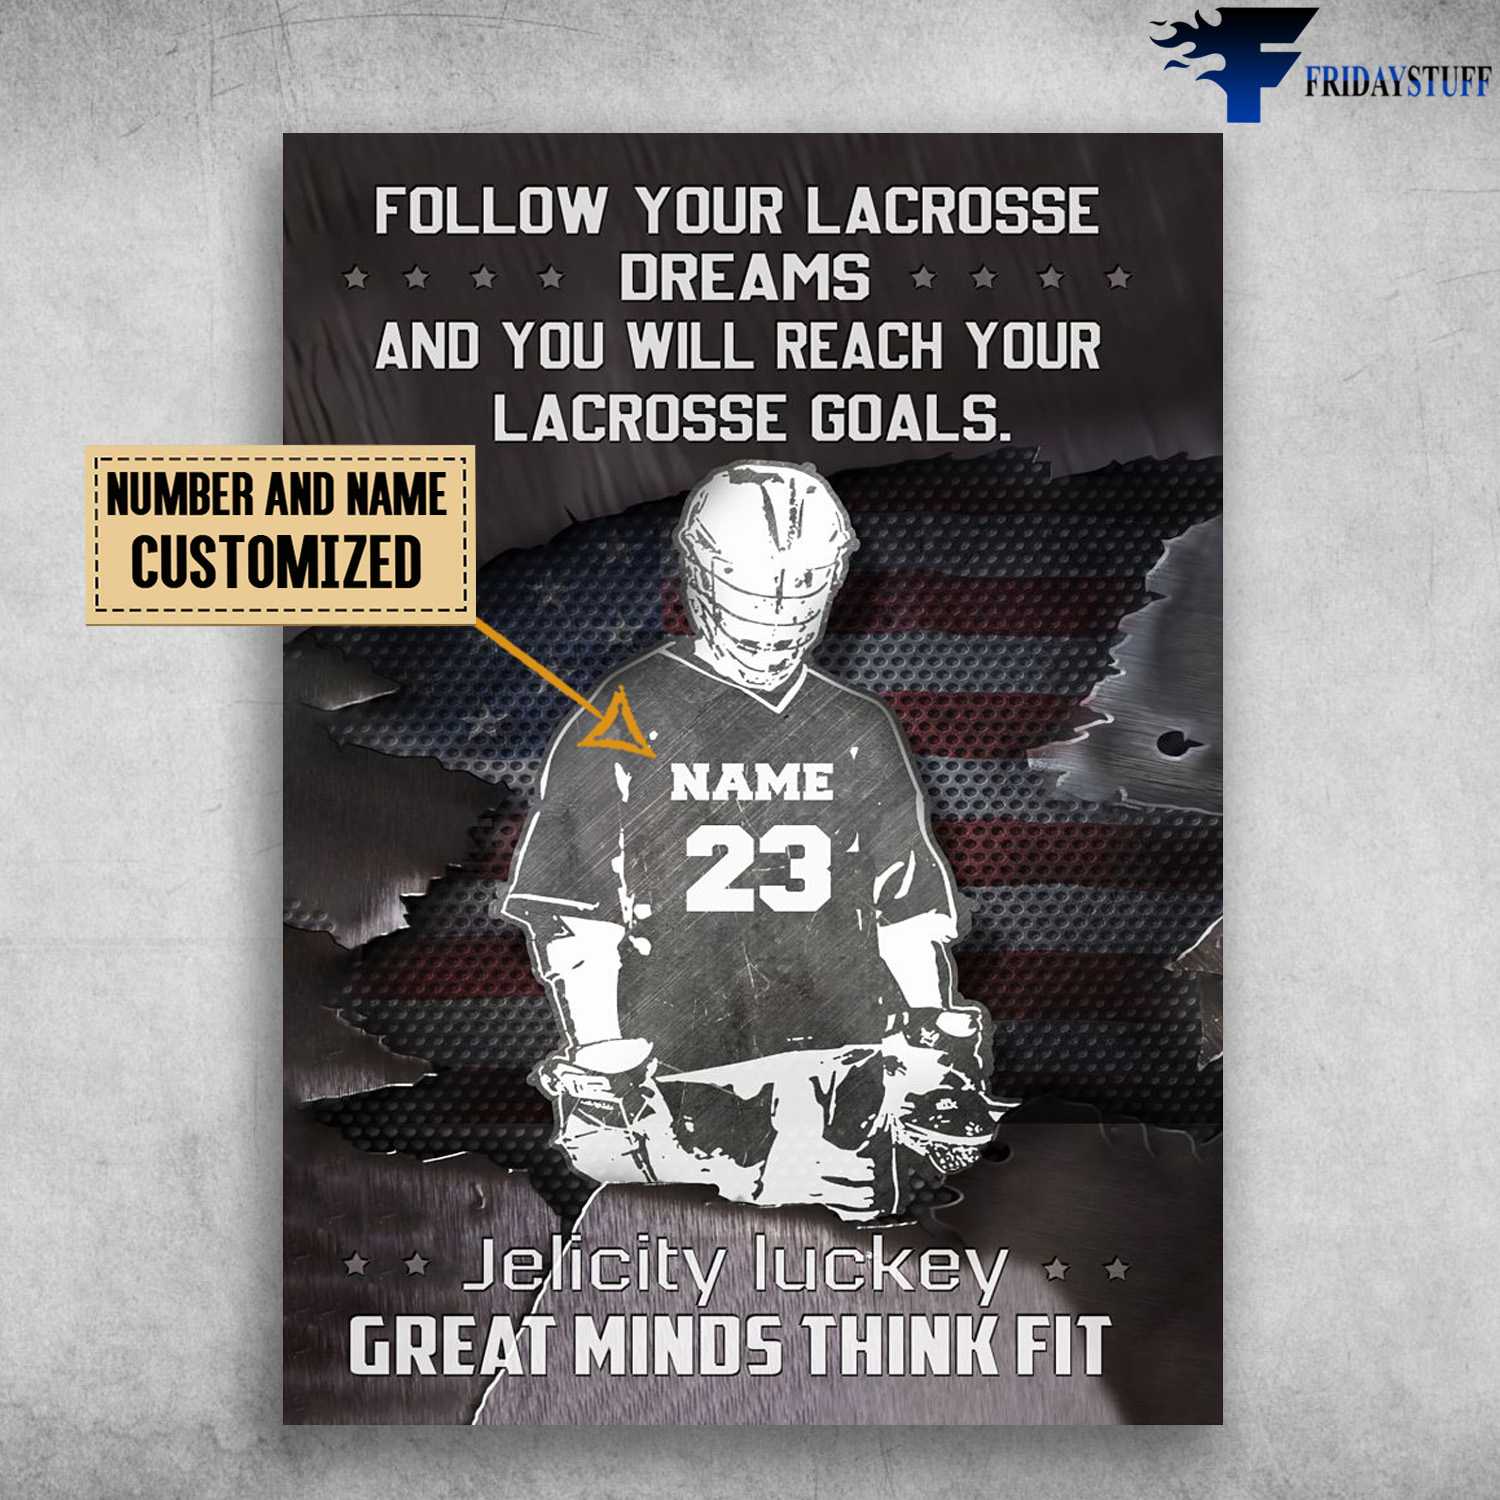 Lacrosse Poster, Lacrosse Player, Follow Your Lacrosse Dreams, And You Will Reach Your Lacrosse Goals, Jelicity Luckey, Great Minds Think Fit